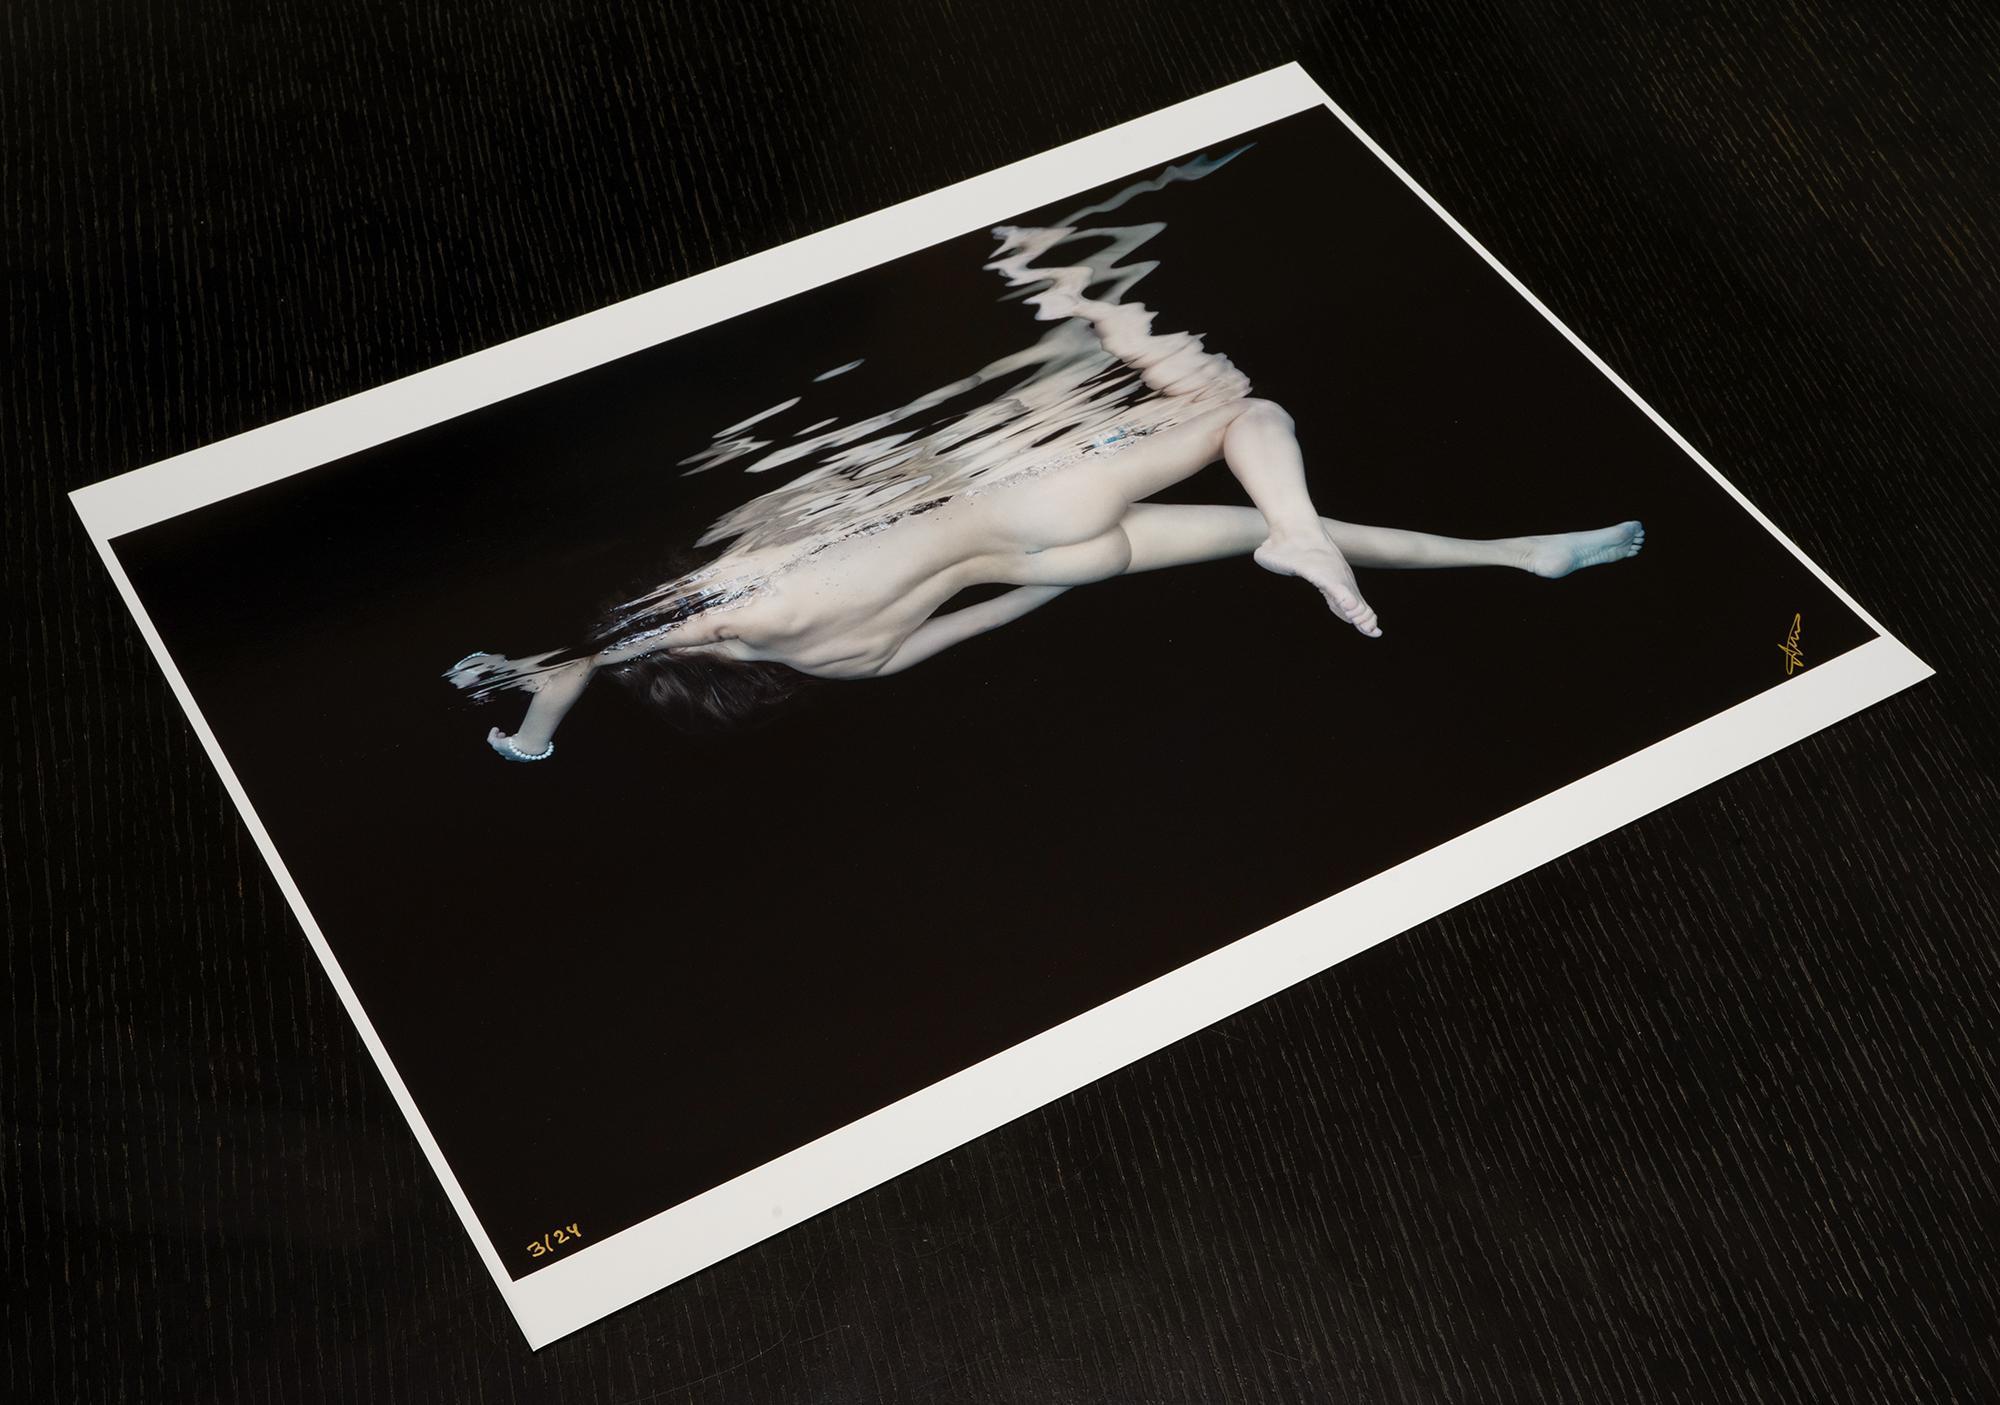 Porcelain II  - underwater nude photograph - print on paper 18